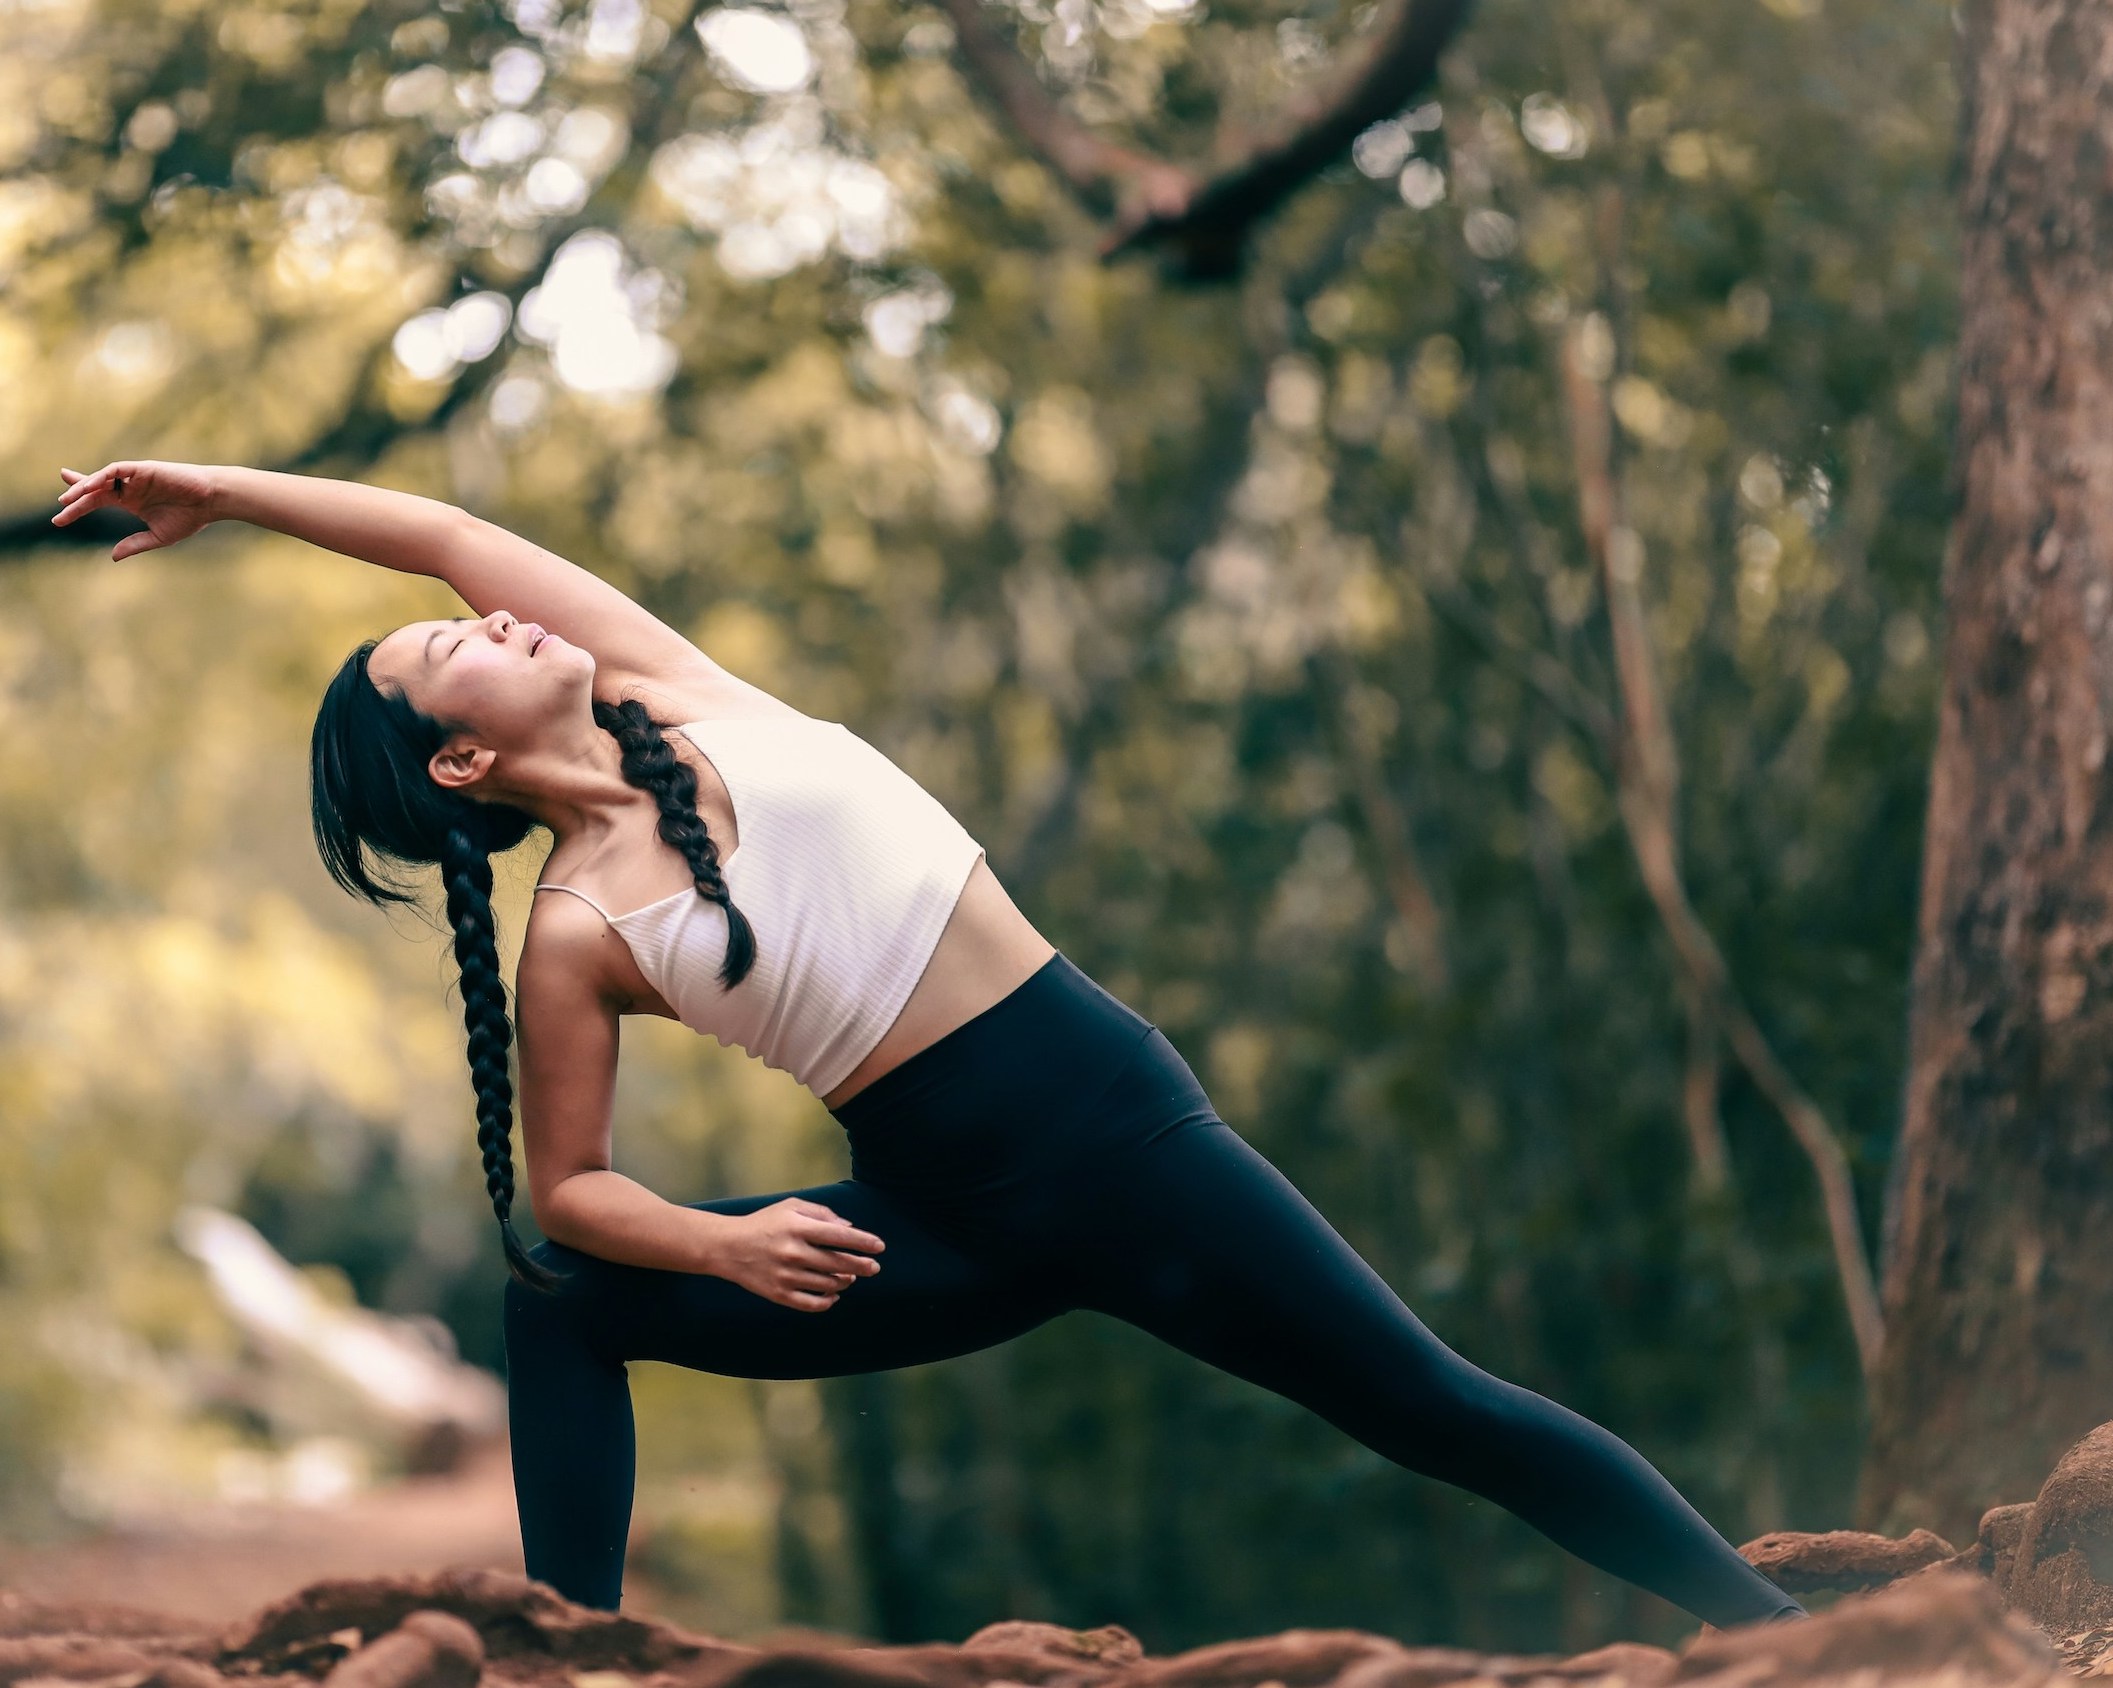 A woman is doing outdoor yoga in dark pants and a light tank top.